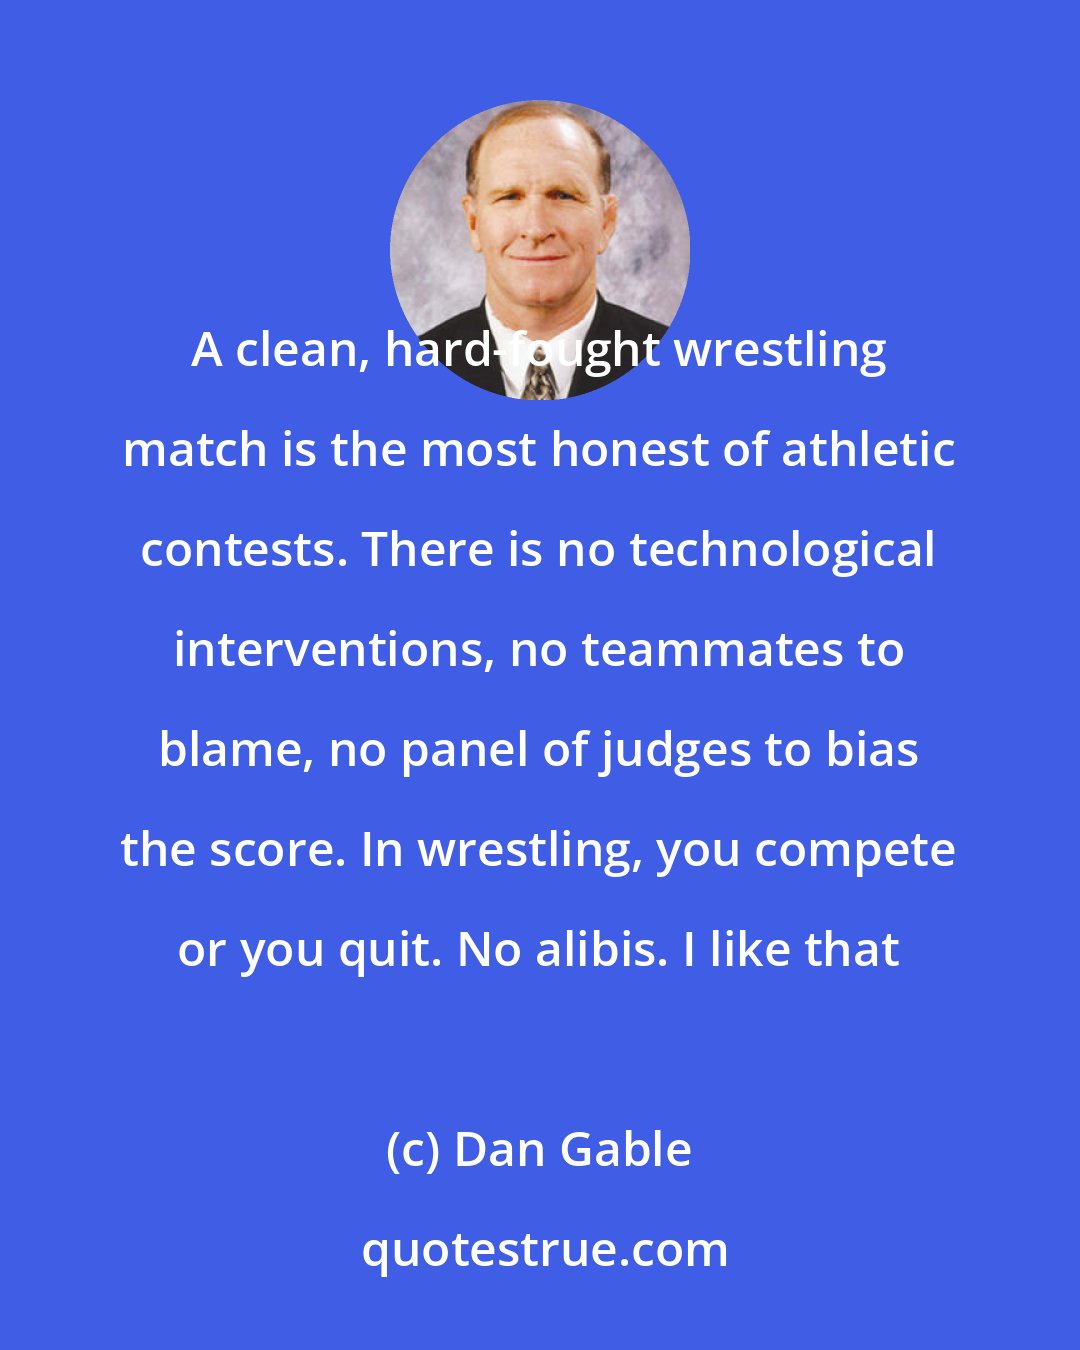 Dan Gable: A clean, hard-fought wrestling match is the most honest of athletic contests. There is no technological interventions, no teammates to blame, no panel of judges to bias the score. In wrestling, you compete or you quit. No alibis. I like that